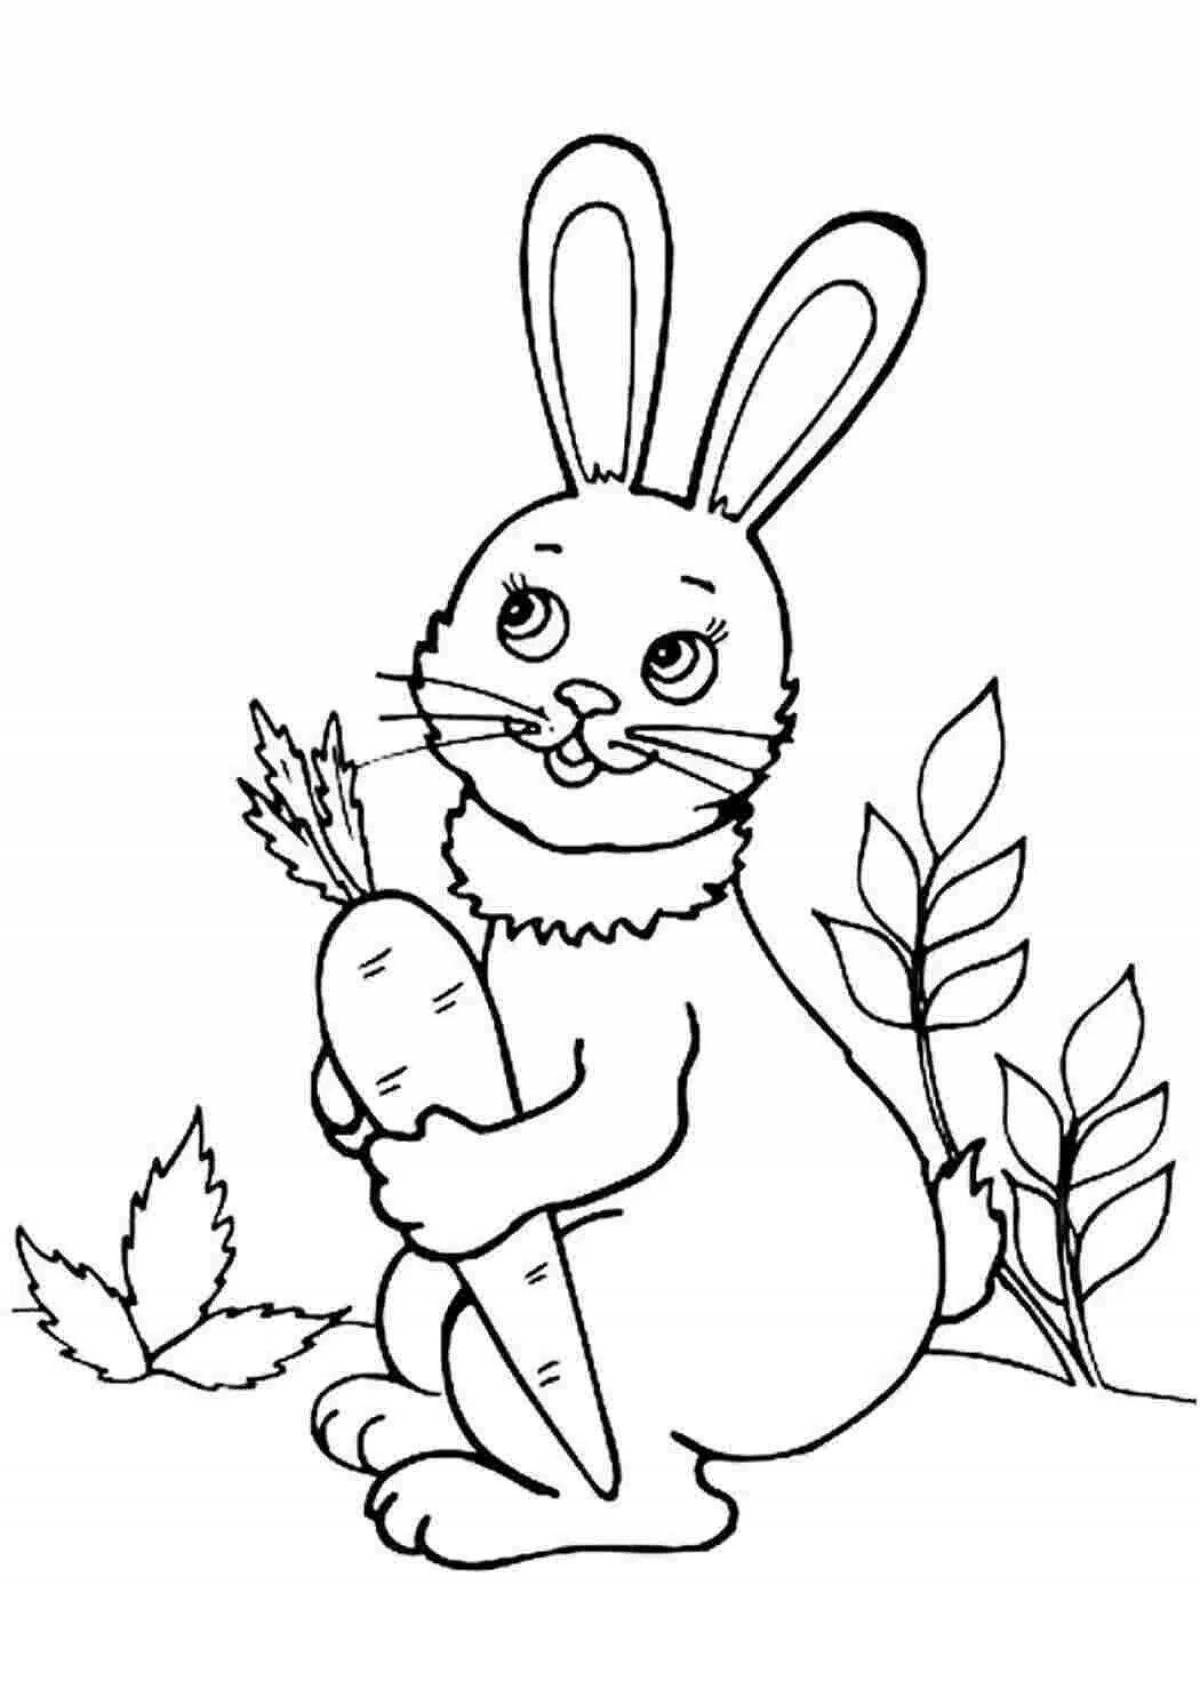 Snuggly coloring page bunny